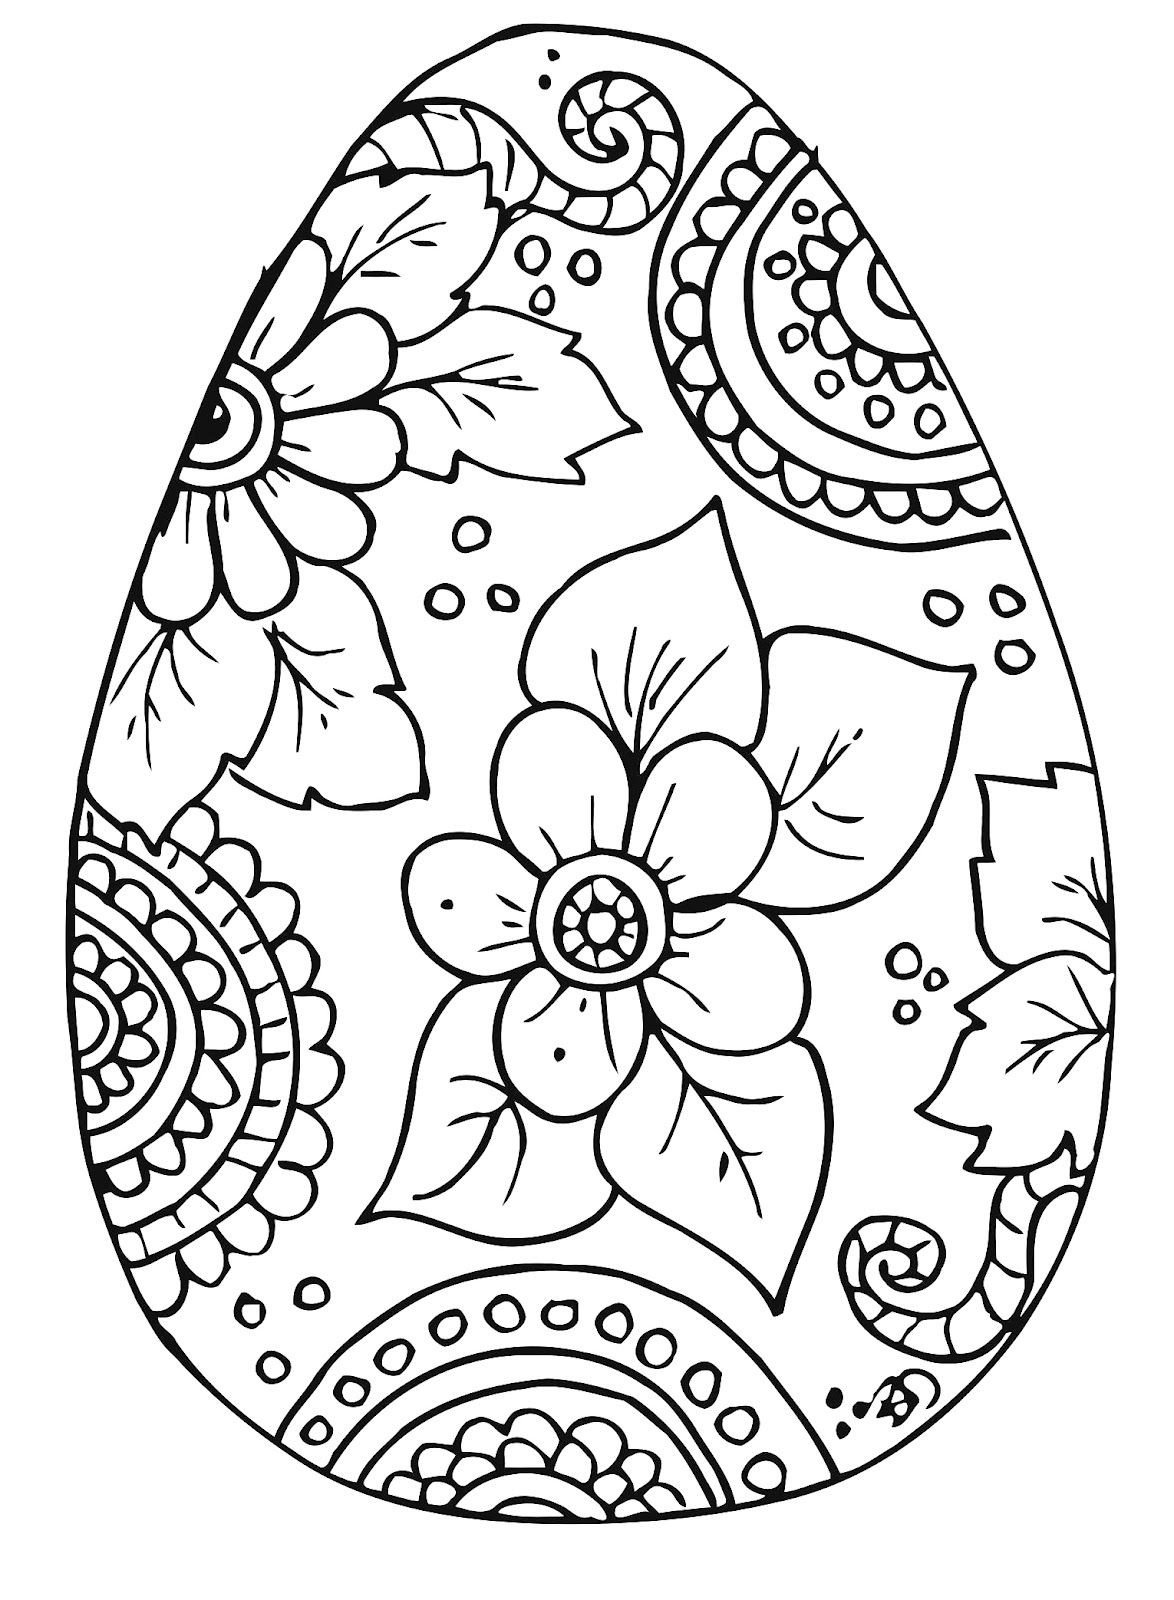 Free Easter Coloring Pages For Toddlers
 10 cool free printable Easter coloring pages for kids who